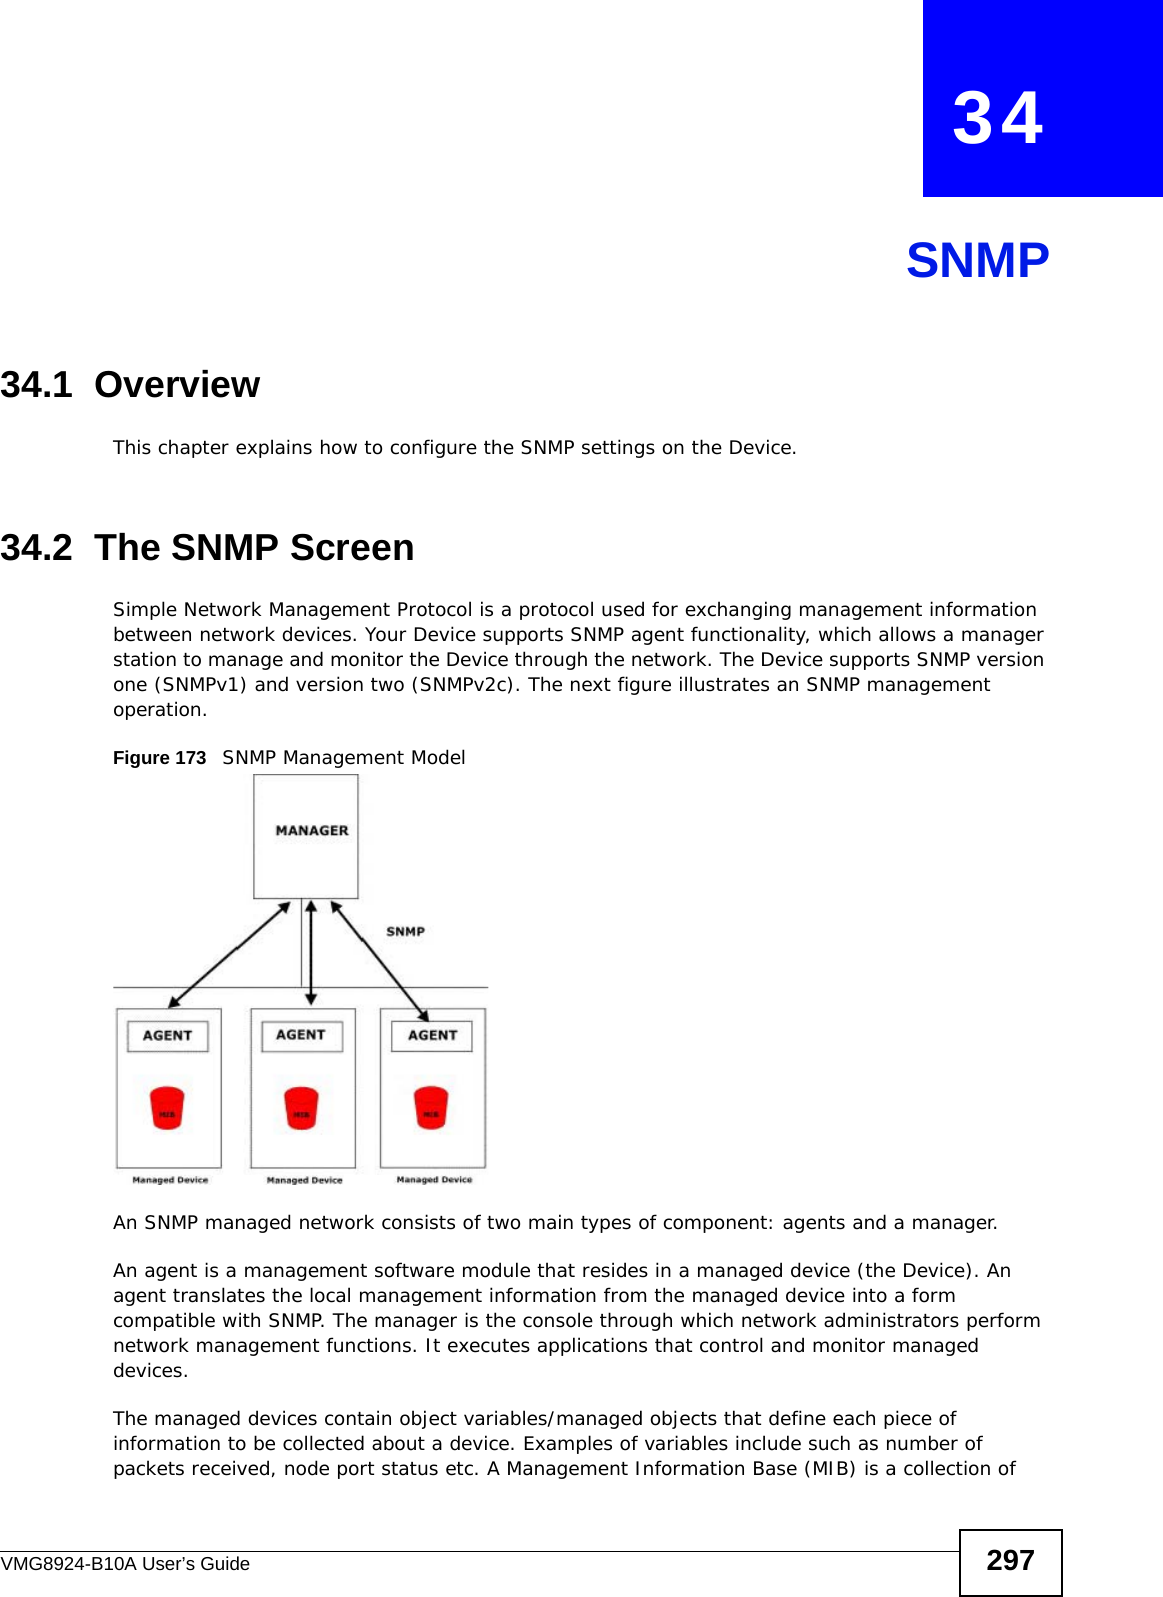 VMG8924-B10A User’s Guide 297CHAPTER   34SNMP34.1  OverviewThis chapter explains how to configure the SNMP settings on the Device.34.2  The SNMP ScreenSimple Network Management Protocol is a protocol used for exchanging management information between network devices. Your Device supports SNMP agent functionality, which allows a manager station to manage and monitor the Device through the network. The Device supports SNMP version one (SNMPv1) and version two (SNMPv2c). The next figure illustrates an SNMP management operation.Figure 173   SNMP Management ModelAn SNMP managed network consists of two main types of component: agents and a manager. An agent is a management software module that resides in a managed device (the Device). An agent translates the local management information from the managed device into a form compatible with SNMP. The manager is the console through which network administrators perform network management functions. It executes applications that control and monitor managed devices. The managed devices contain object variables/managed objects that define each piece of information to be collected about a device. Examples of variables include such as number of packets received, node port status etc. A Management Information Base (MIB) is a collection of 